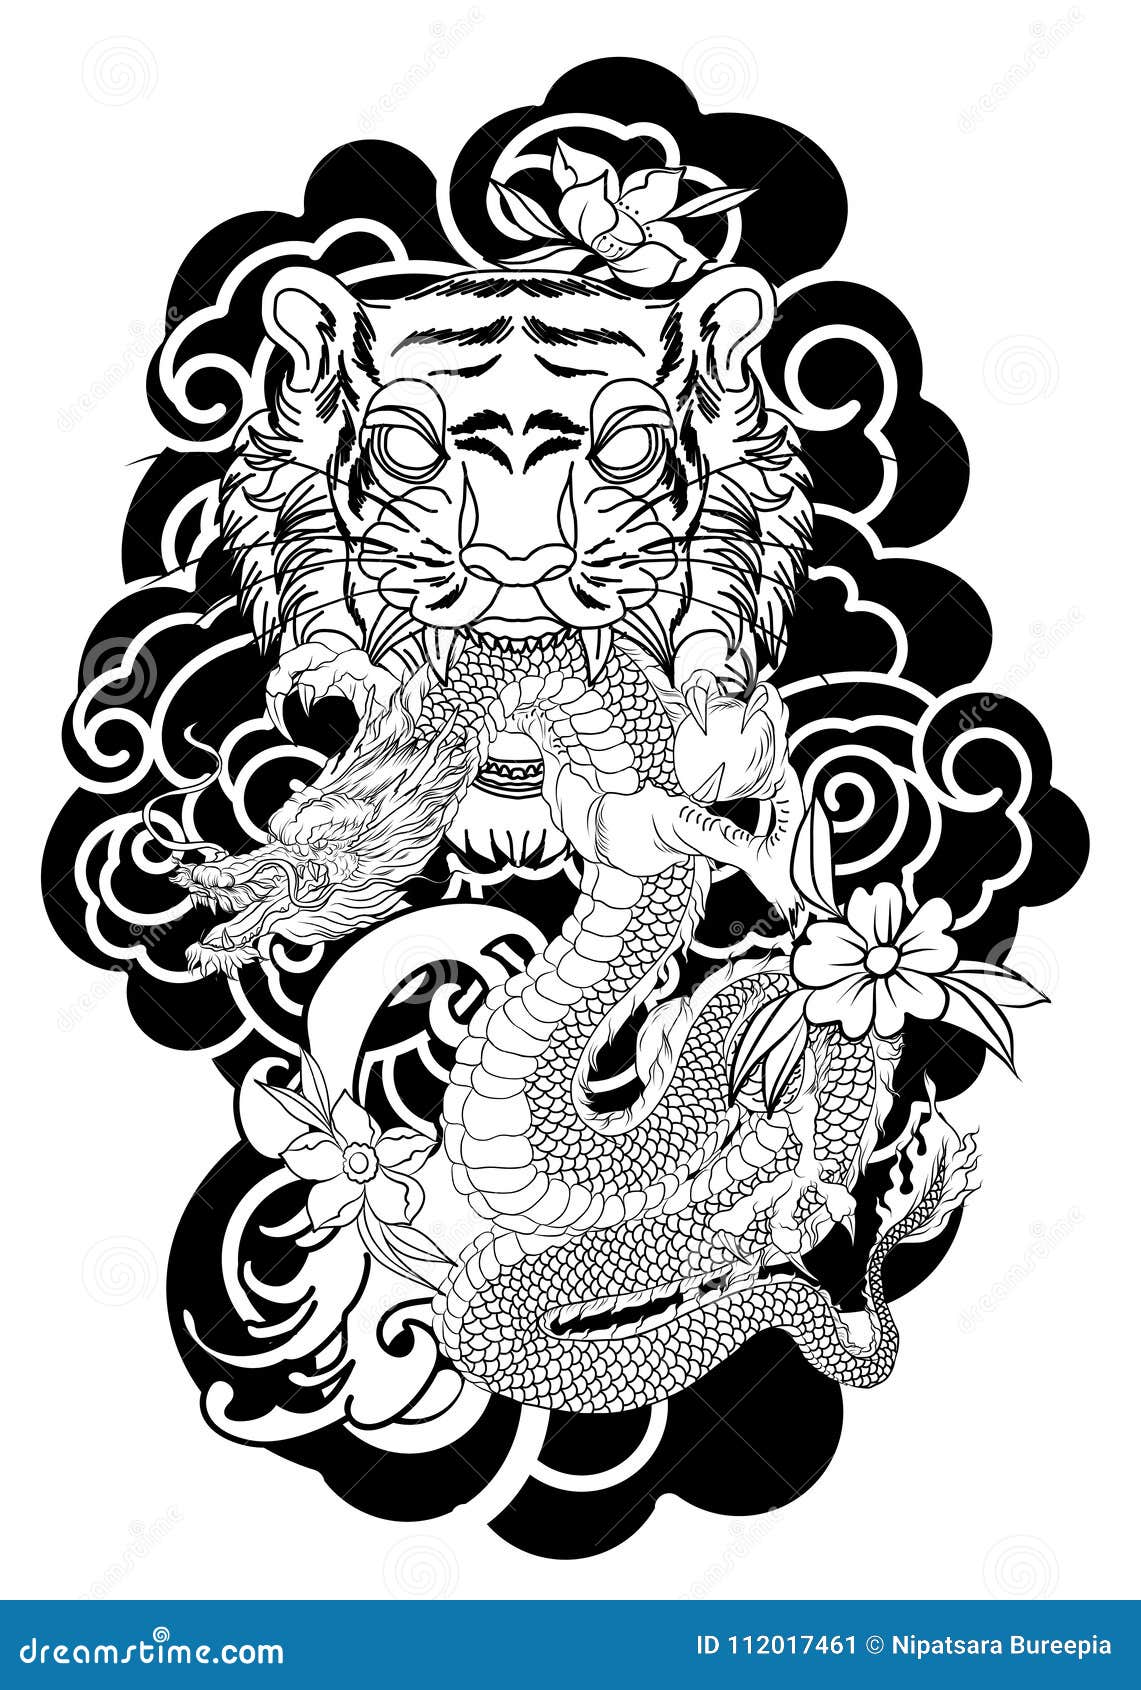 Traditional Japanese Tattoo Design for Back BodyTiger Face with Old Dragon  on Cloud Background Stock Vector  Illustration of graphic abstract  112017461